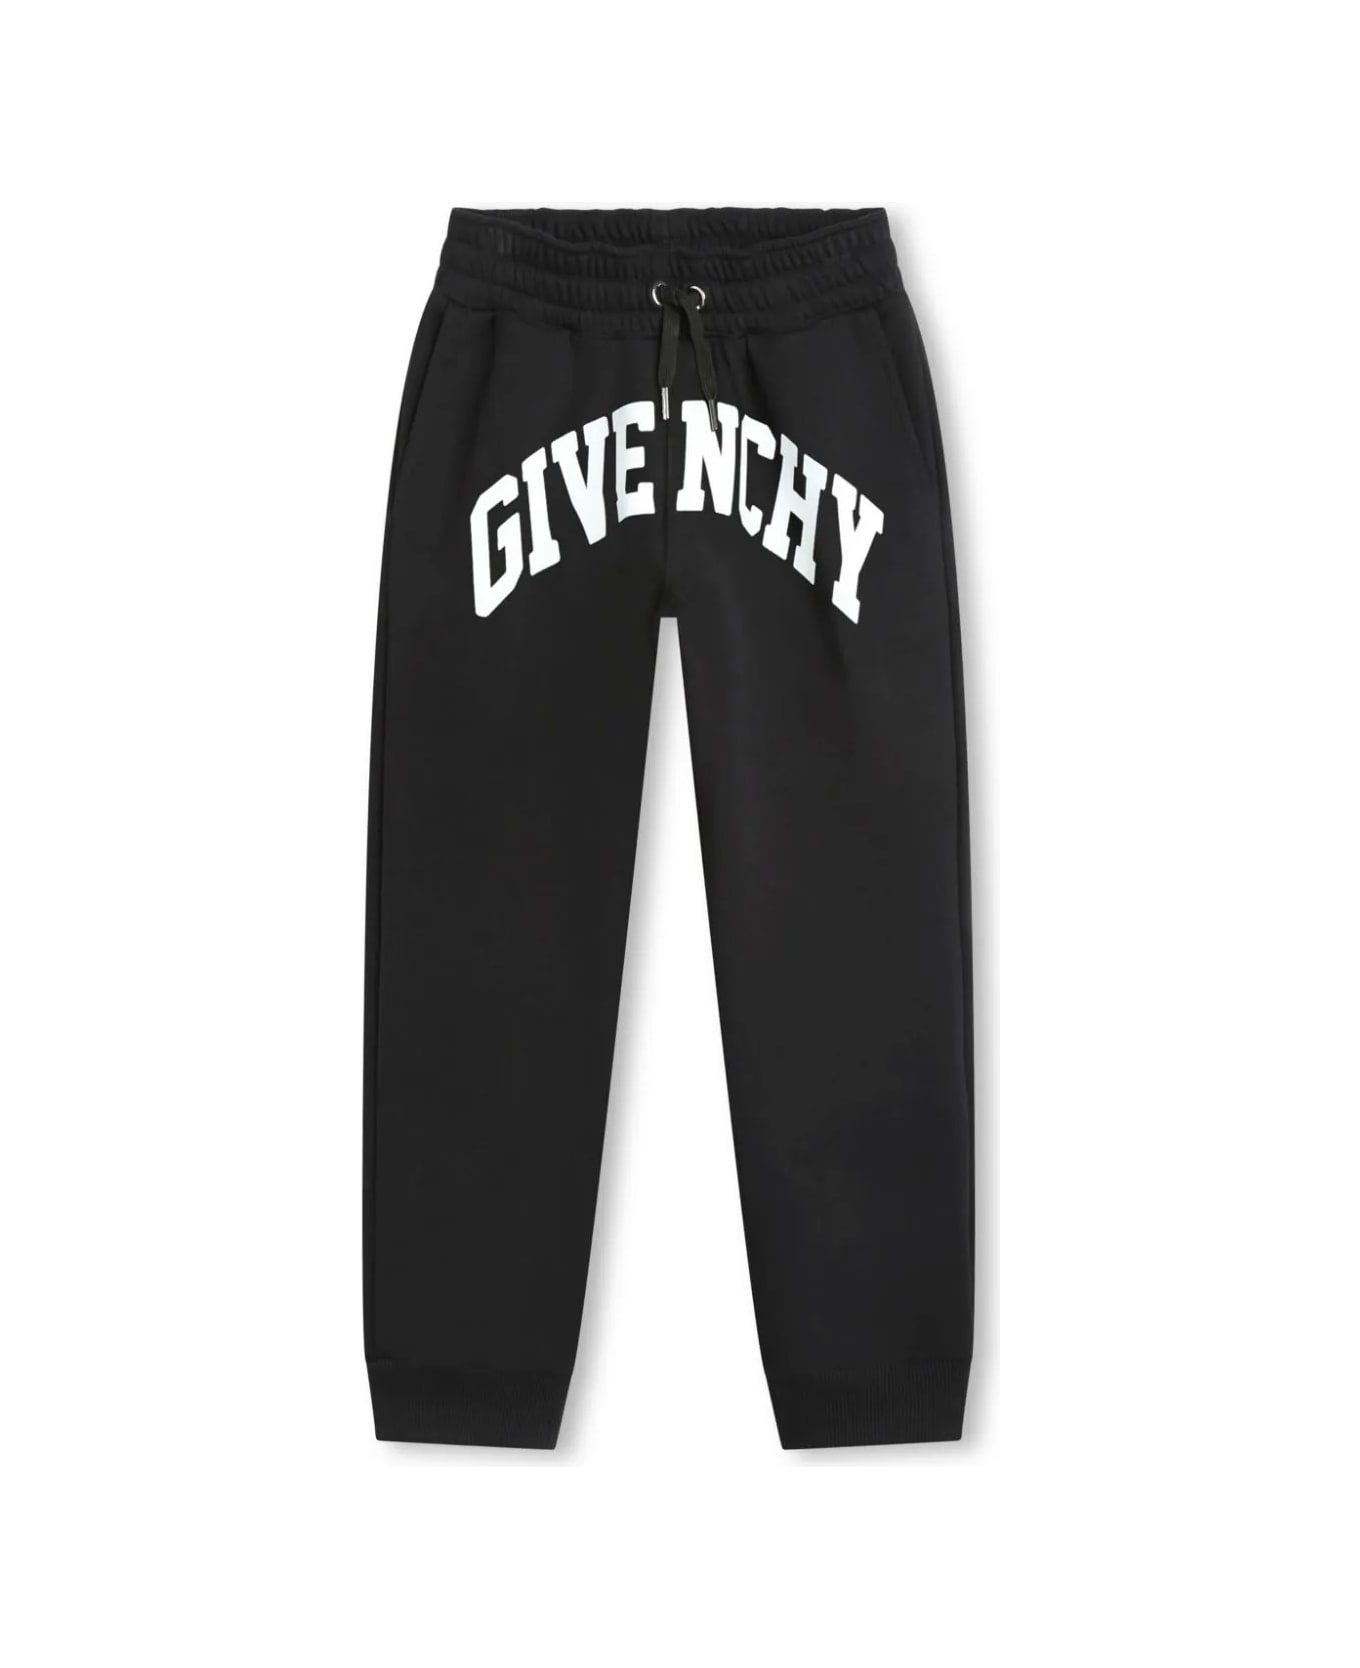 Givenchy Black Joggers With Arched Logo - Black